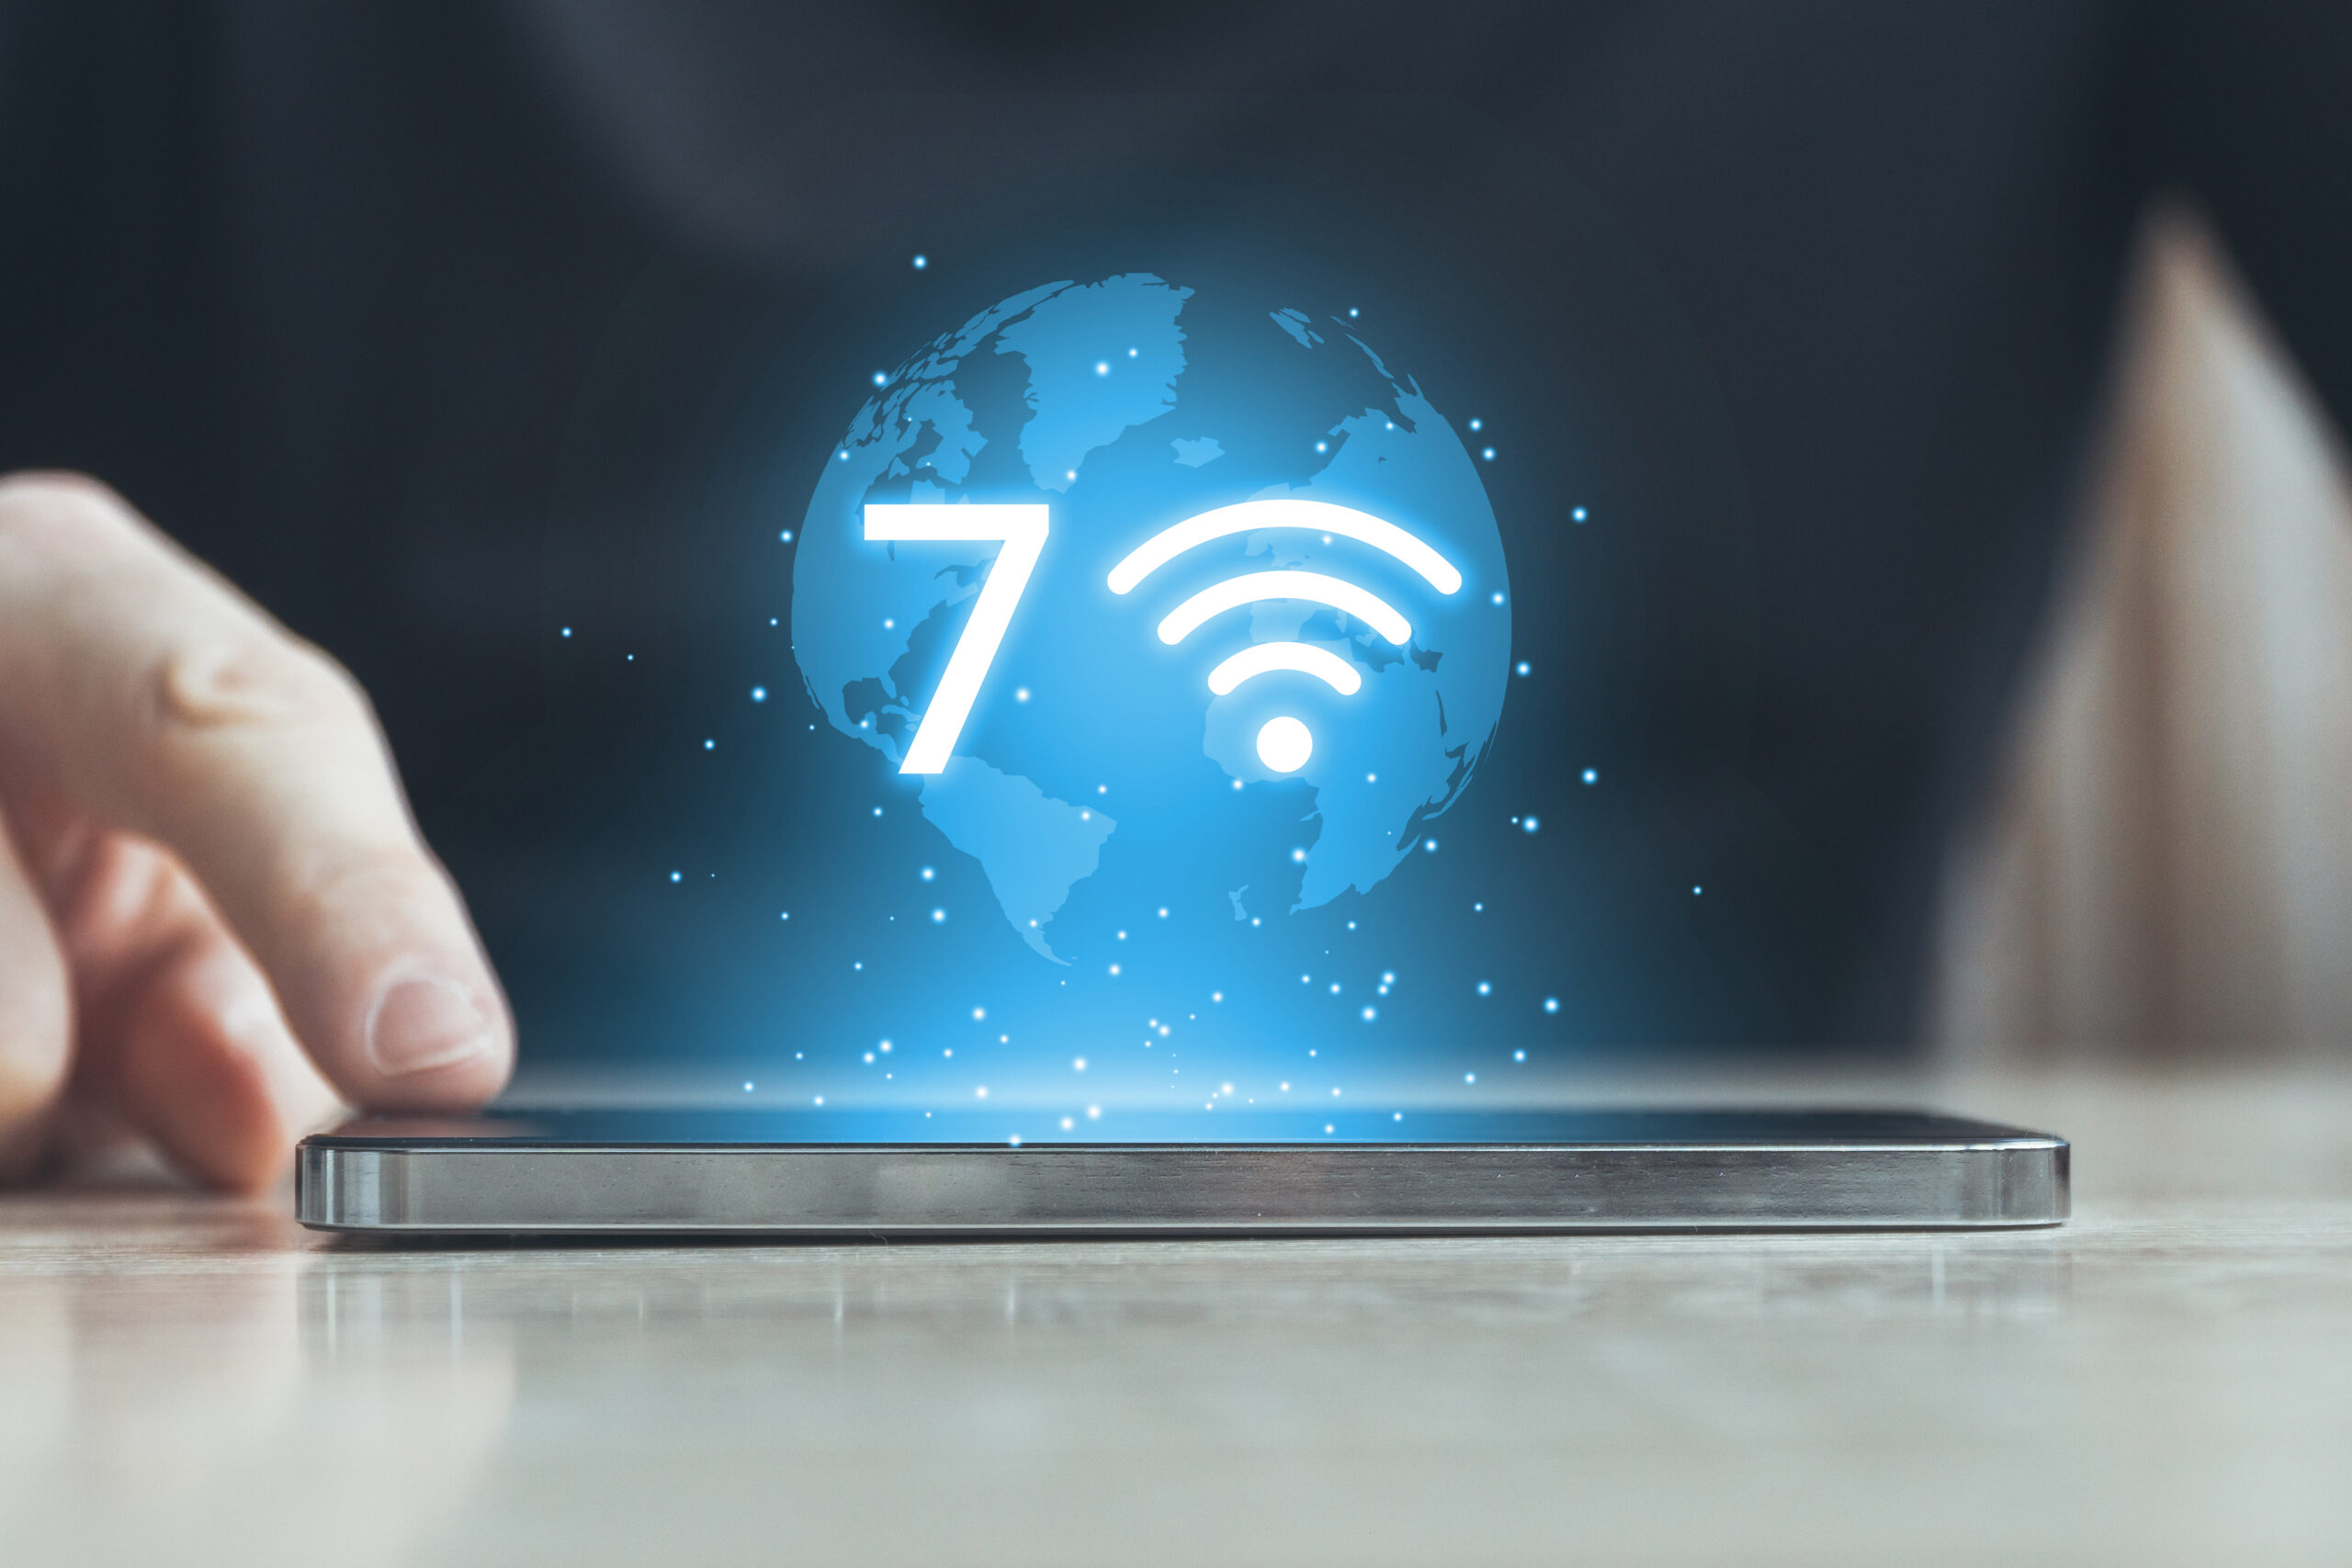 At a Glance: What Is New in Wi-Fi 7?